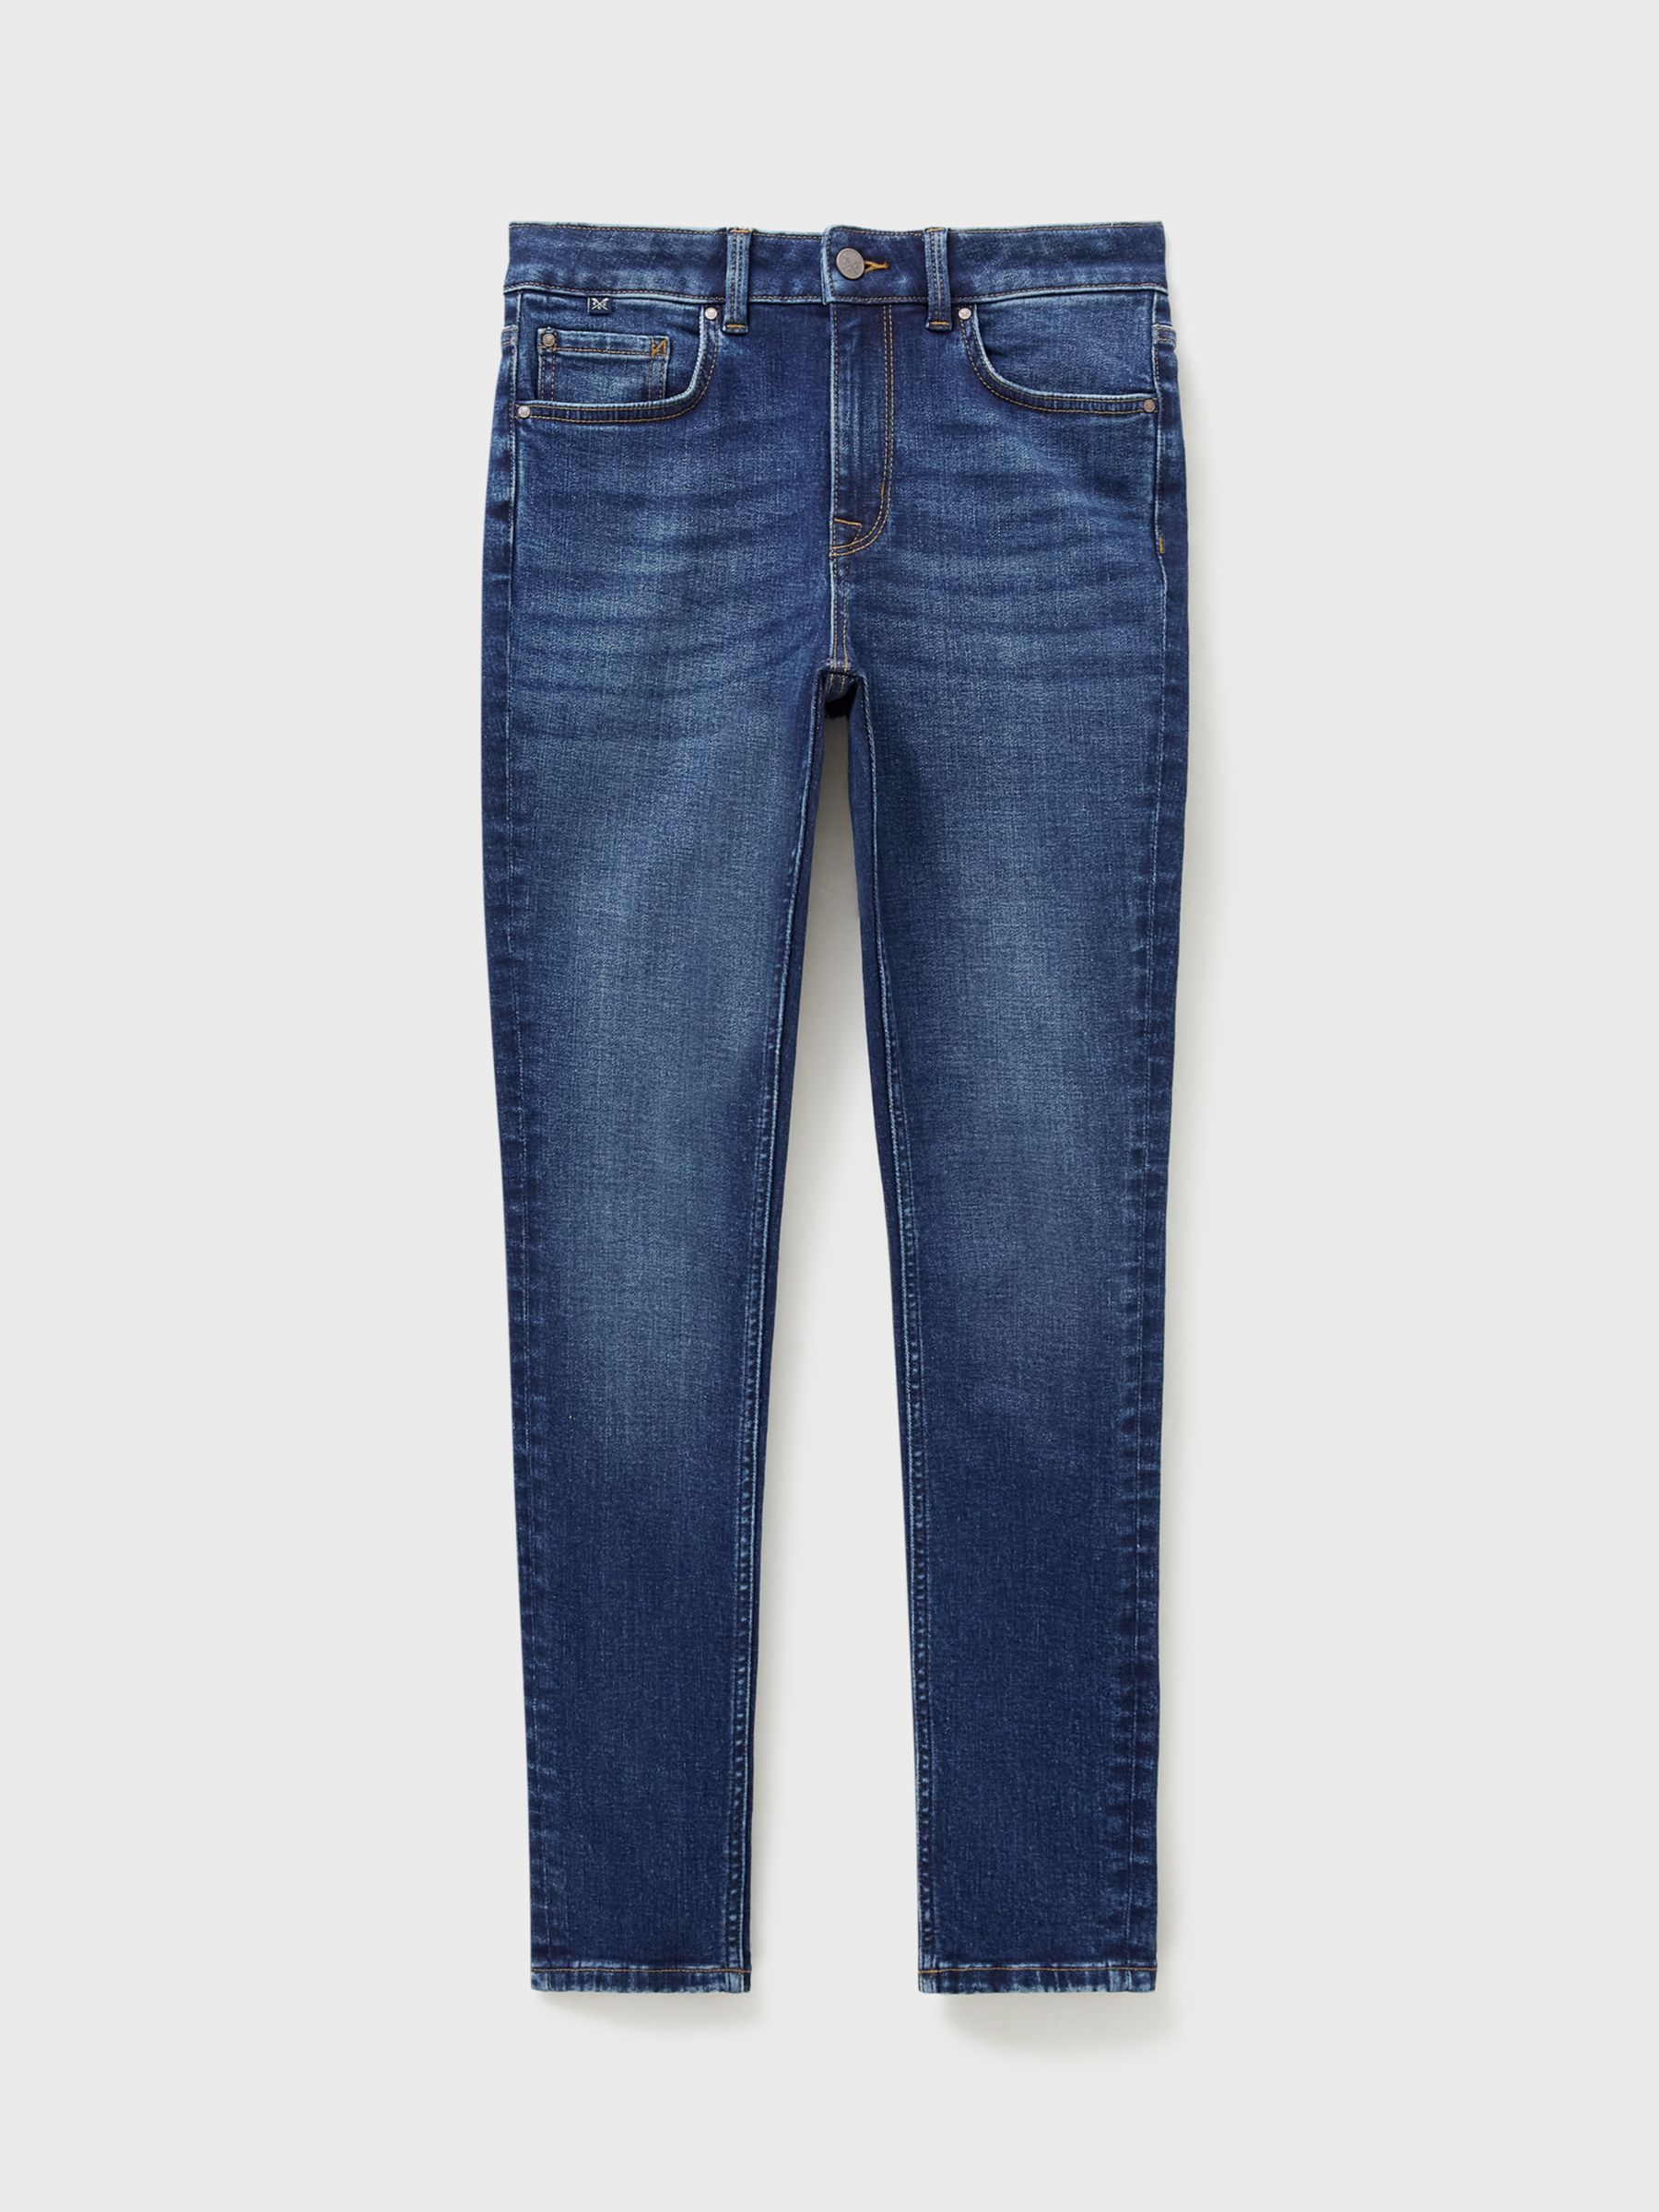 Buy Crew Clothing Skinny Jeans Online at johnlewis.com